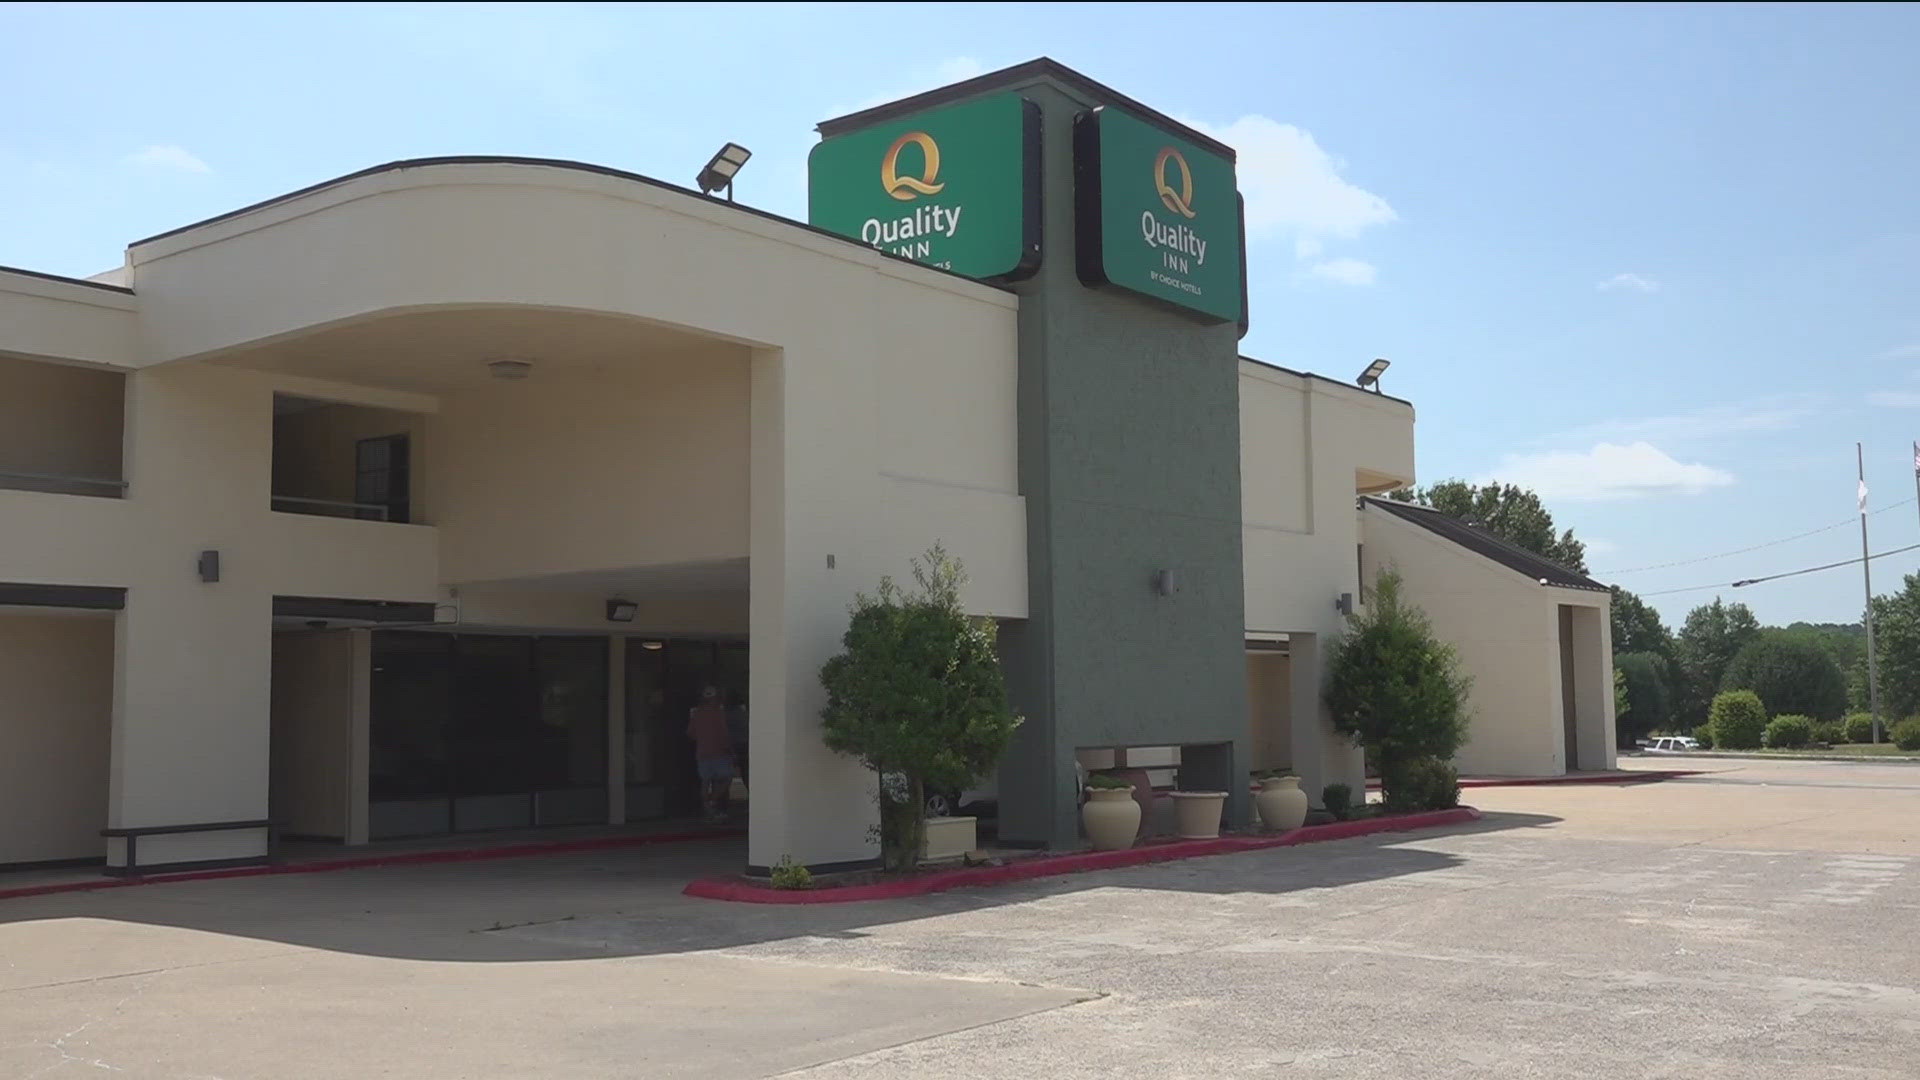 Fayetteville City Council members voted to rezone the area, giving a project developer the green light to begin converting the motel.